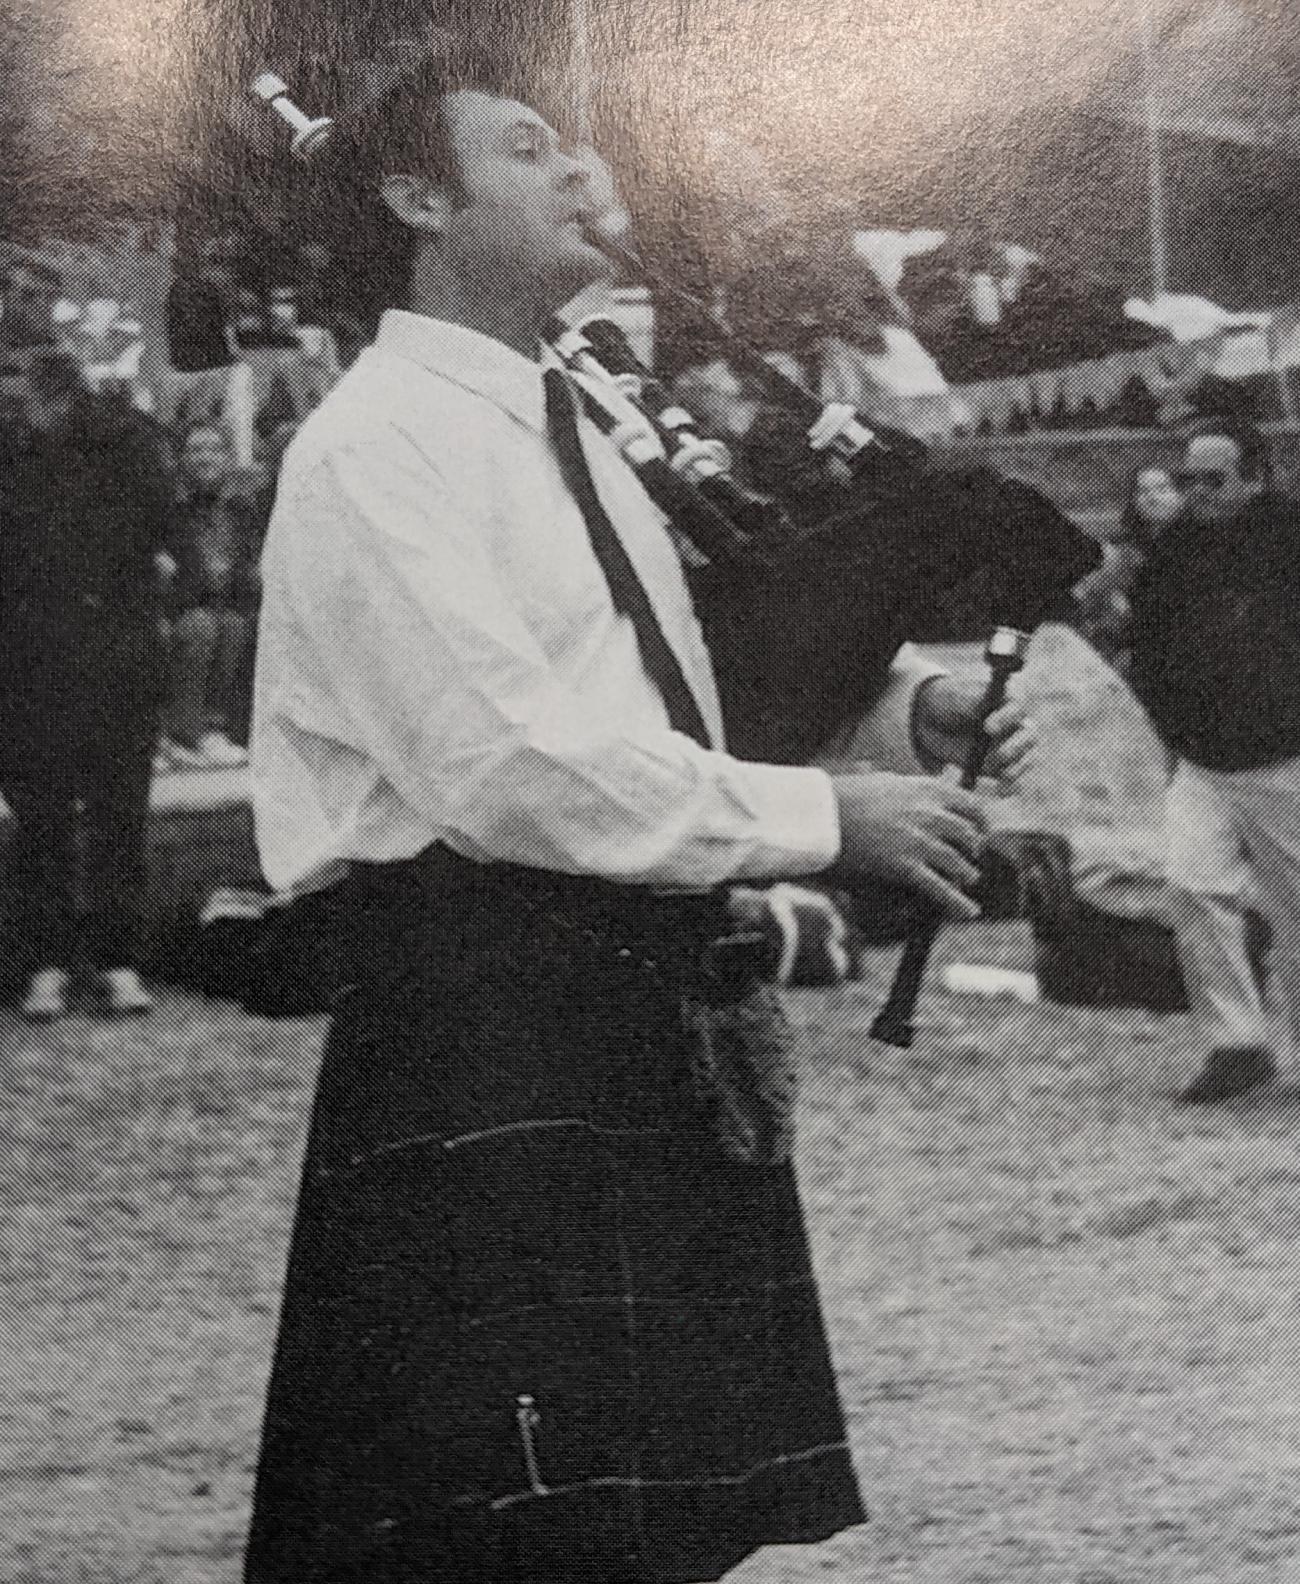 A black and white photo of piper wearing a kilt performing on a rugby pitch.